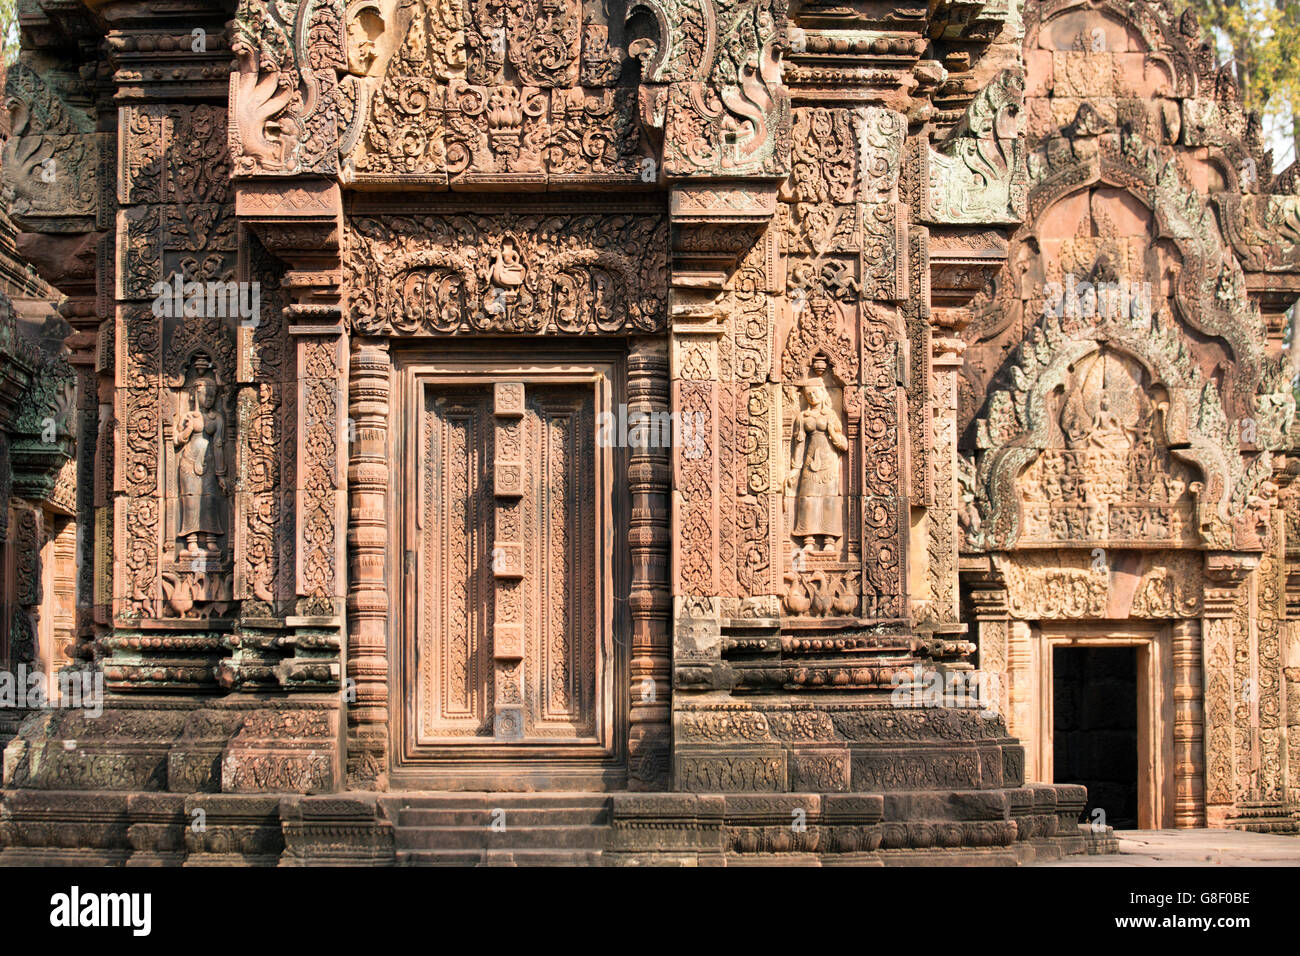 Carvings and decorated doorways at the 10th Century Khmer Hindu Banteay Srey temples built in the reign of Rajendravarman II, Angkor, Cambodia Stock Photo